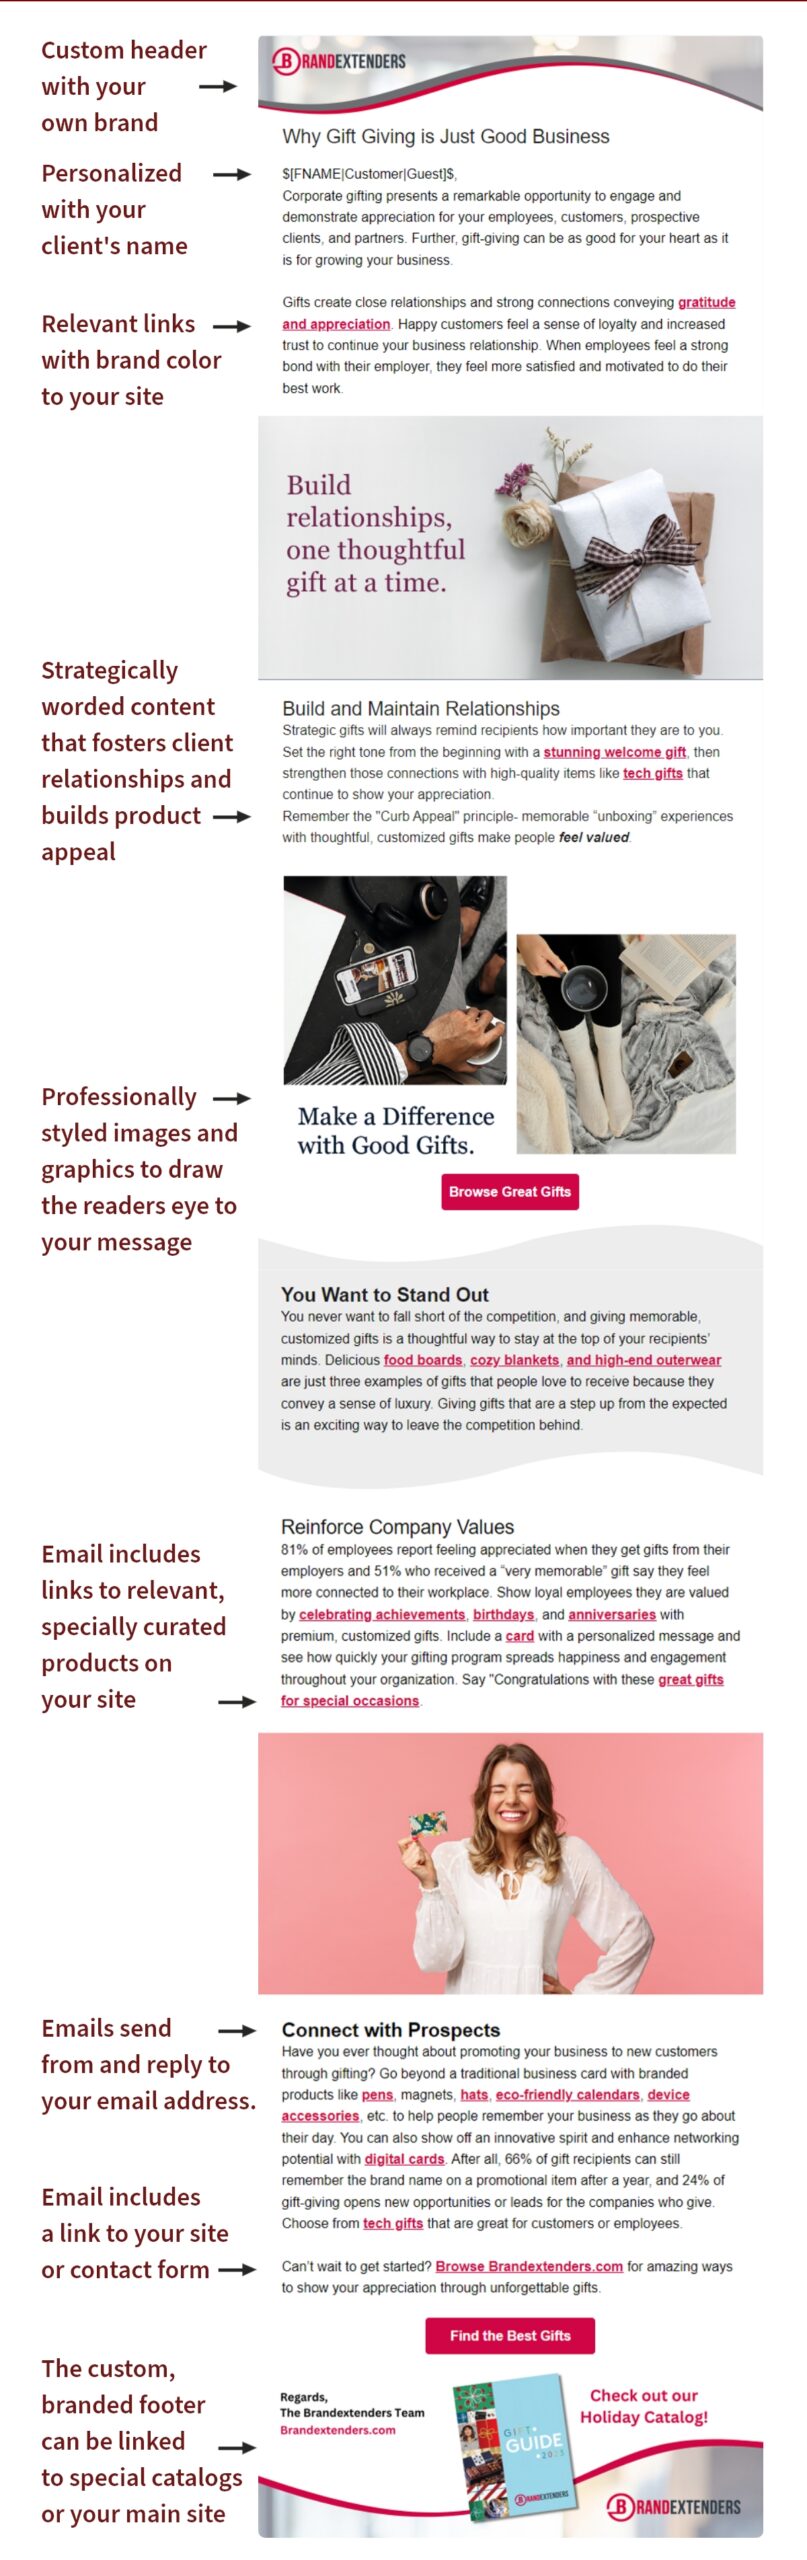 sample email campaign with features labeled